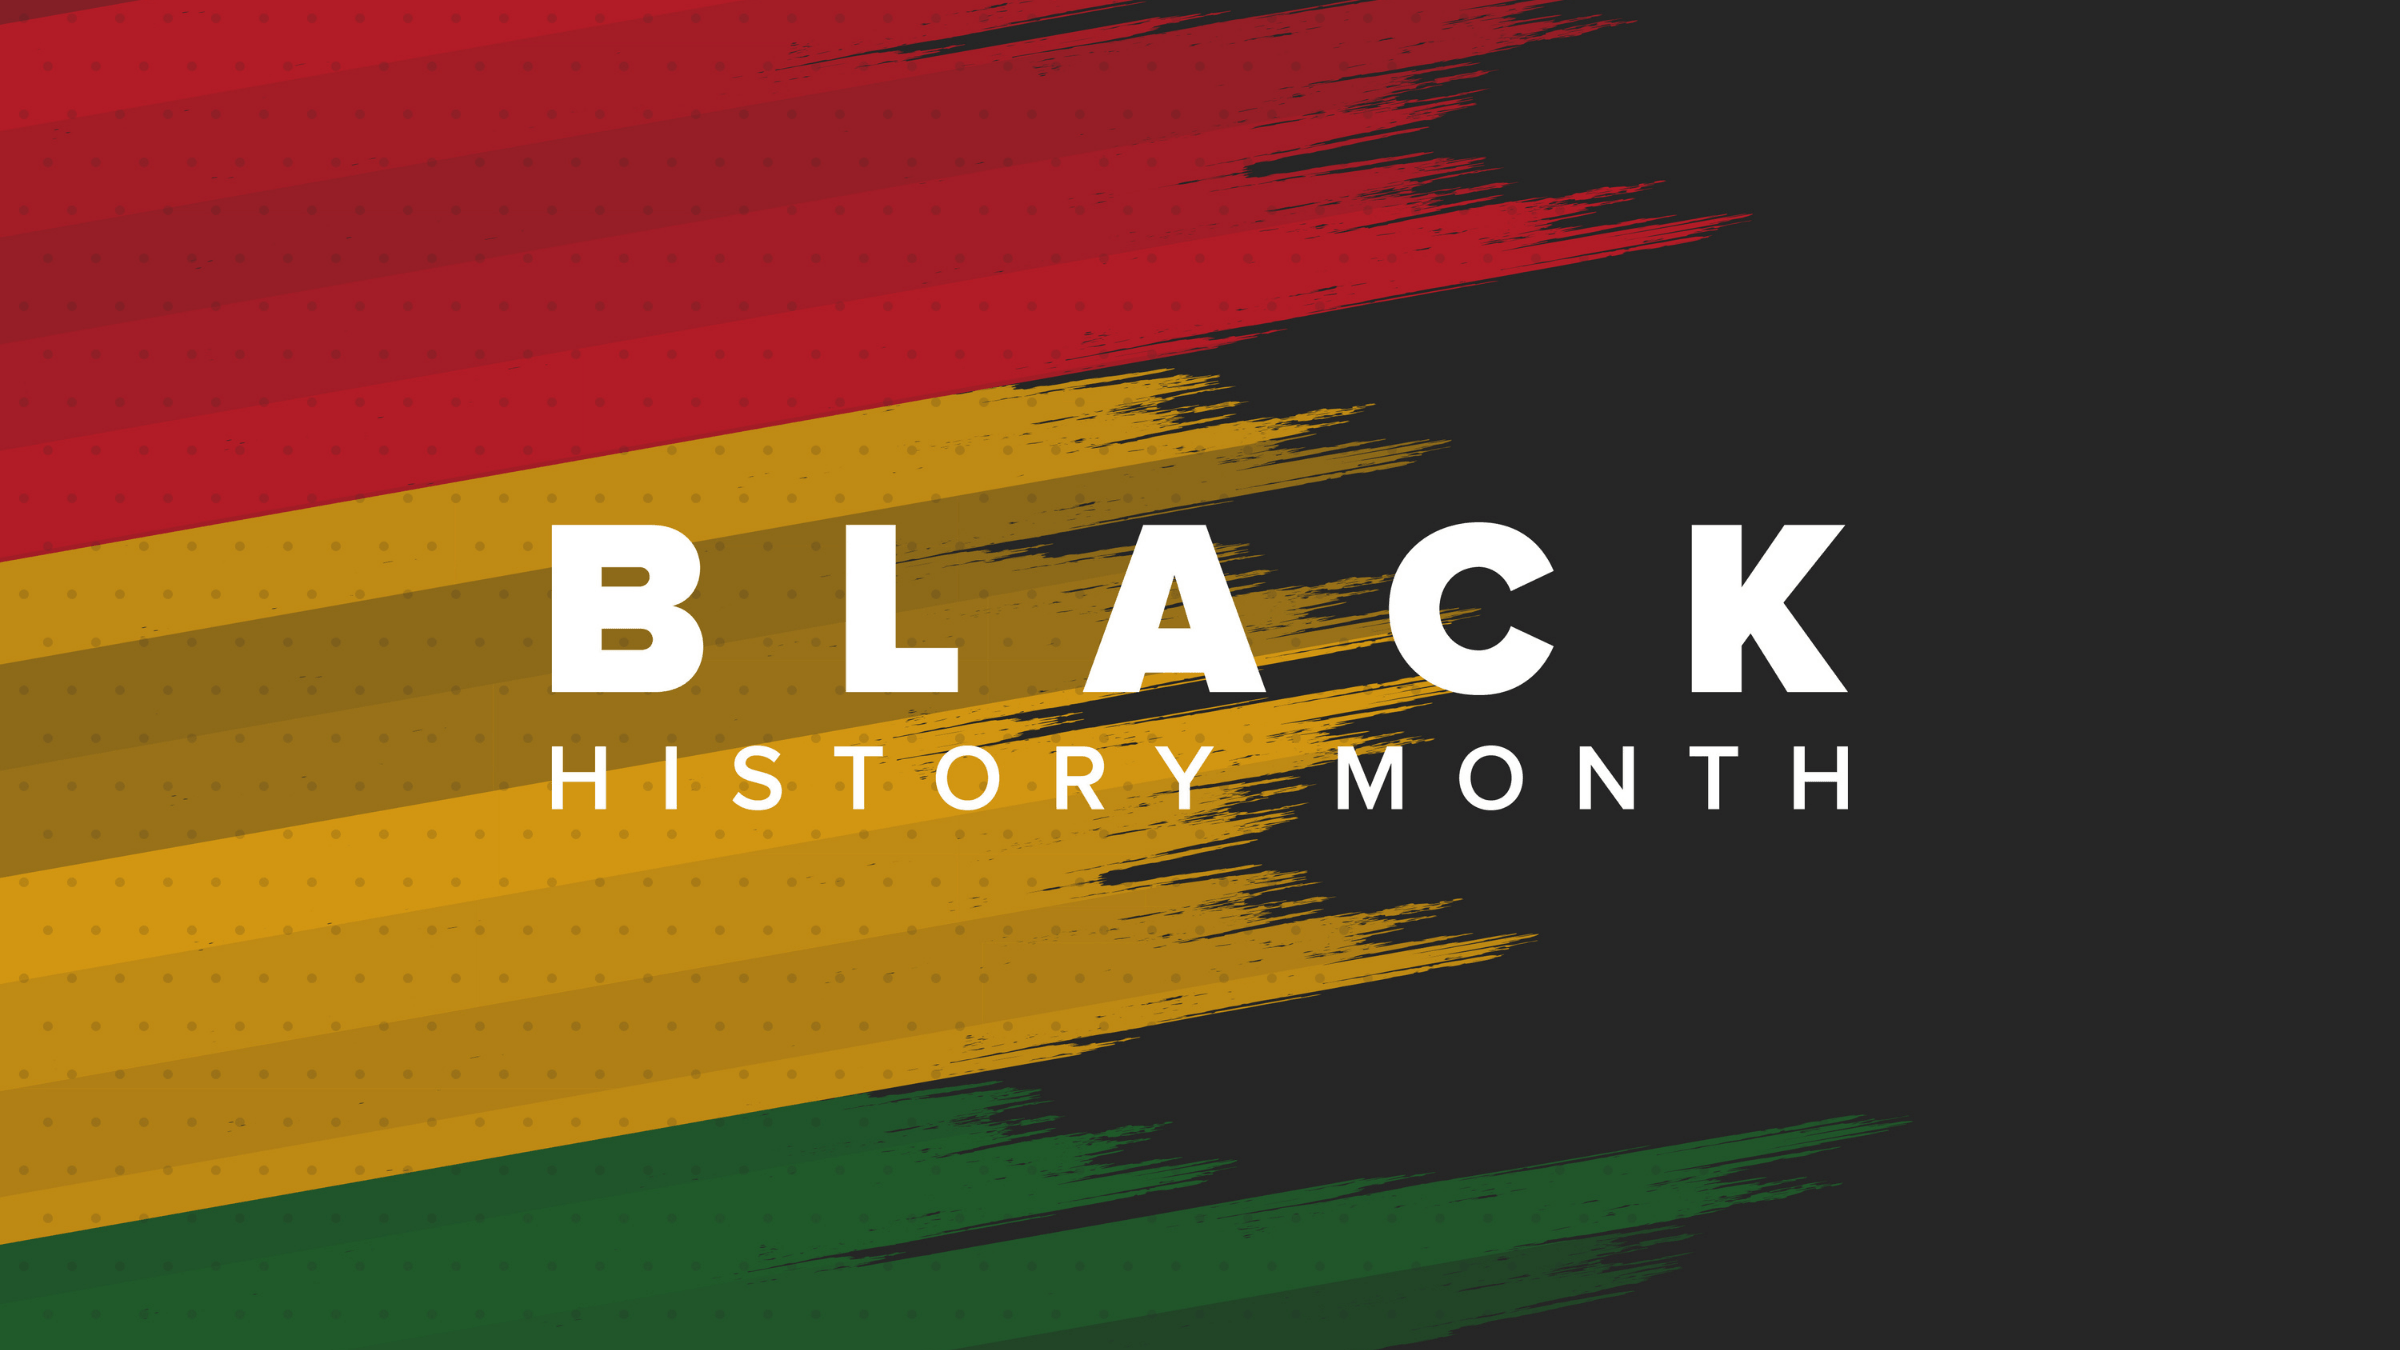 Reflecting on Black History Month in 2020: a leap forward, but a long road ahead